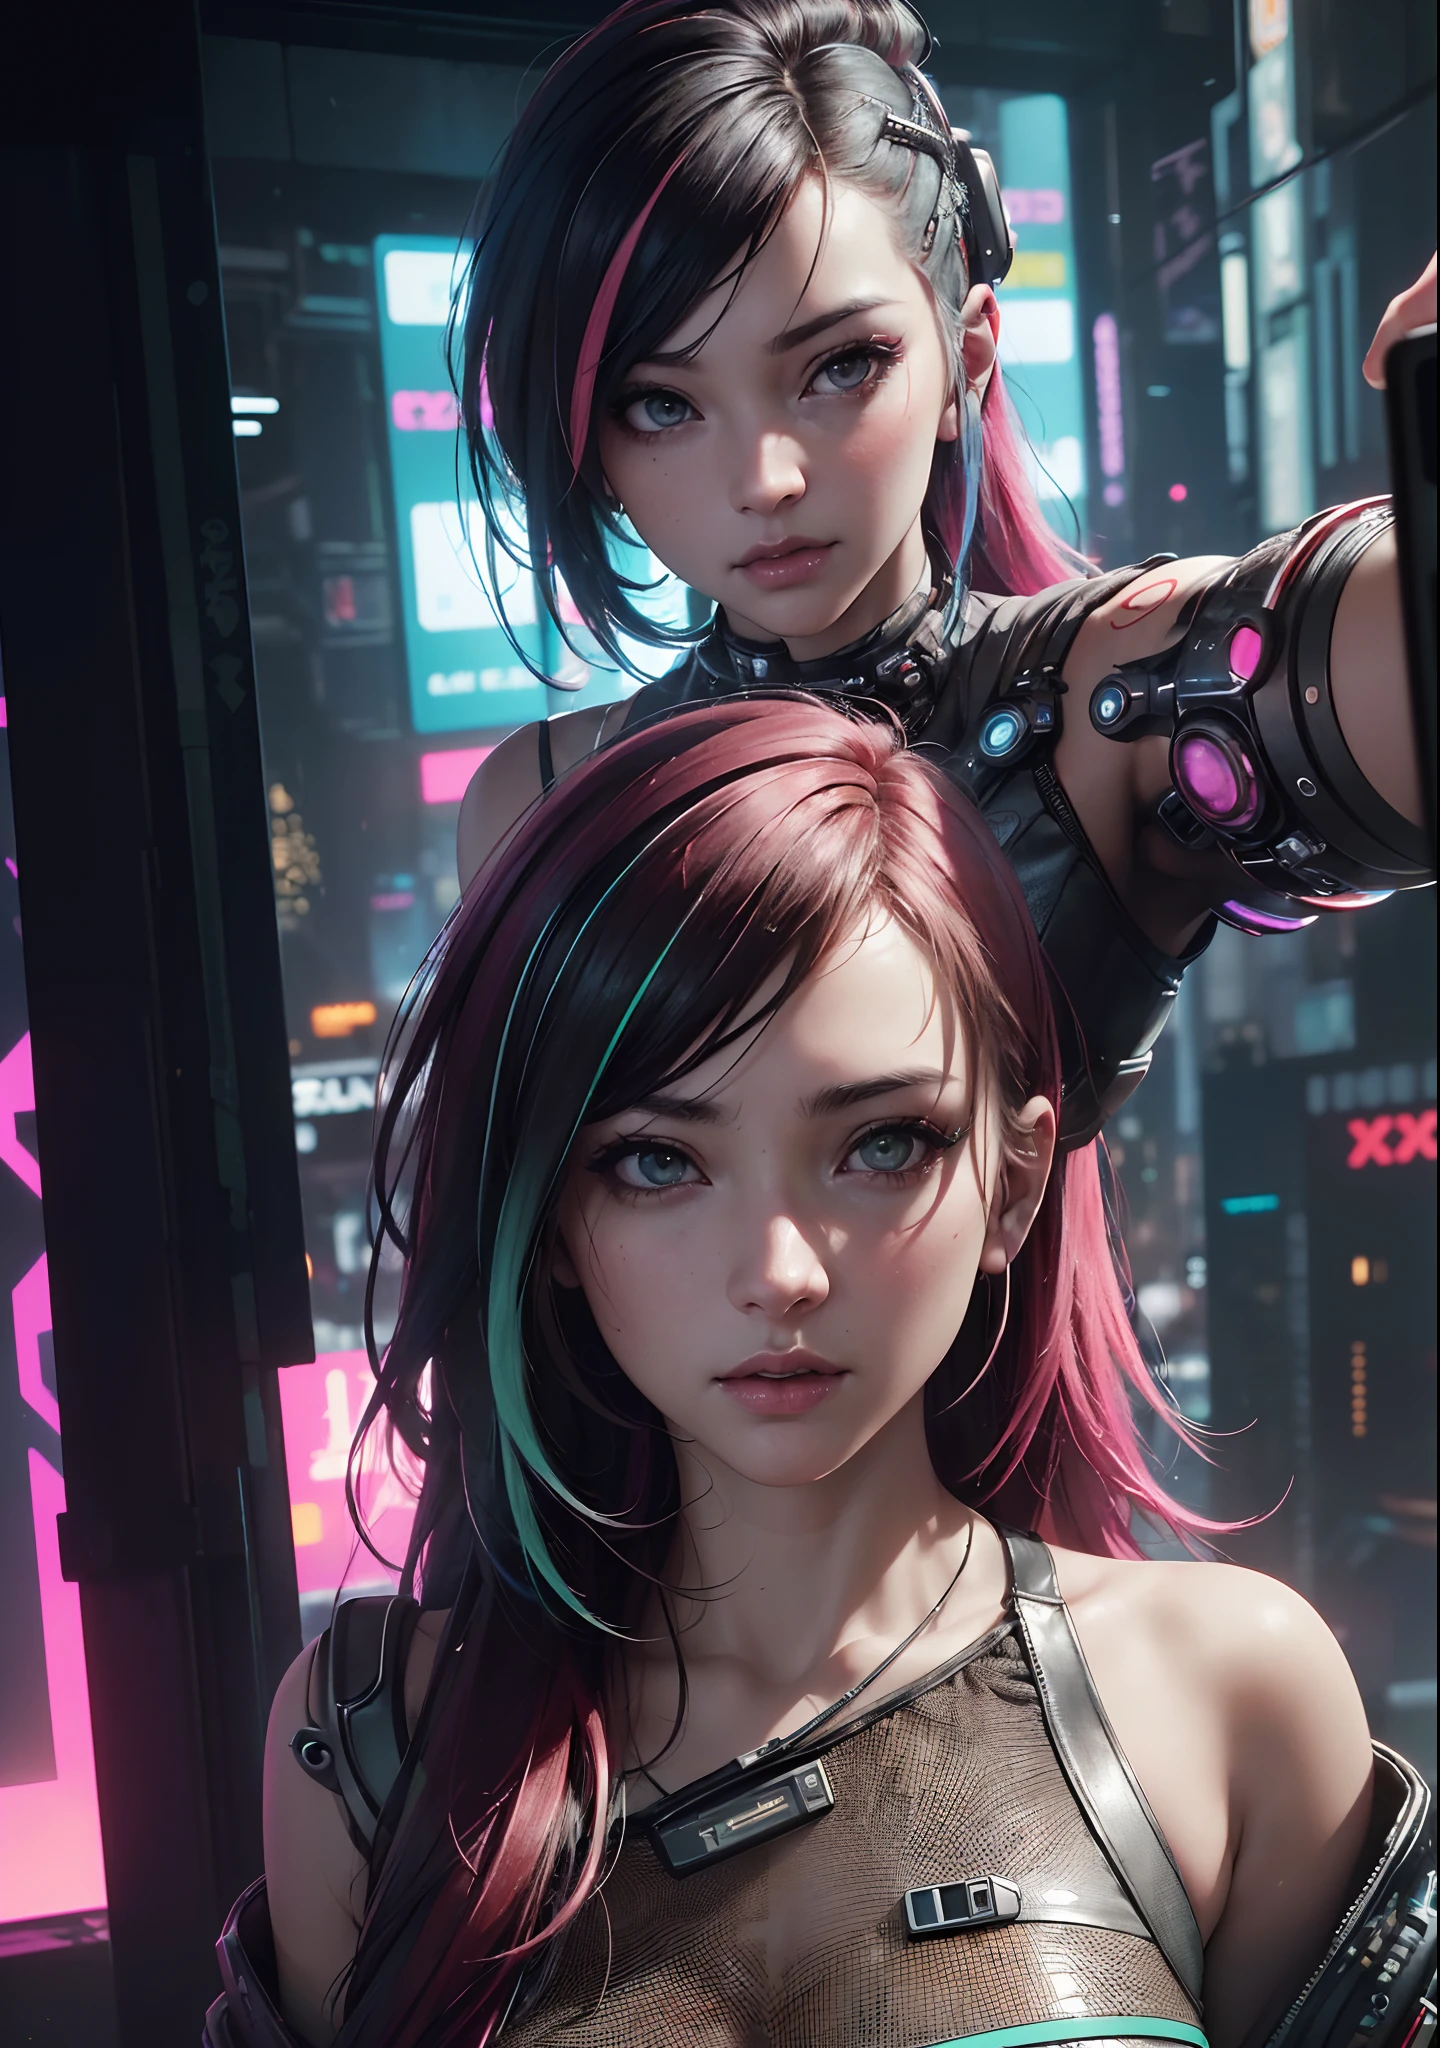 analog style, model shoot style, photo ((selfie:1.8)) of a girl, 1girl, (cyberpunk:1.8, cyberpunk city background:1.8), ((cutest face: 1.8, perfect face:1.3)), (long multicolored hair:1.4, pale skin:1.5), (from above:1.2), best quality, epic (by lee jeffries photo, sony a7, 50 mm, pores:1.5, colors, hyperdetailed:1.5, film grain:1.4, hyperrealistic: 1.5), octane render, hyper-realistic lifelike texture, masterpiece, unreal engine 5, Extremely detailed CG unity 8k wallpaper, Madly detailed photo, hyper-realistic light, (Winner of the Pulitzer Prize for Photography and Taylor Wessing Photographic Prize)